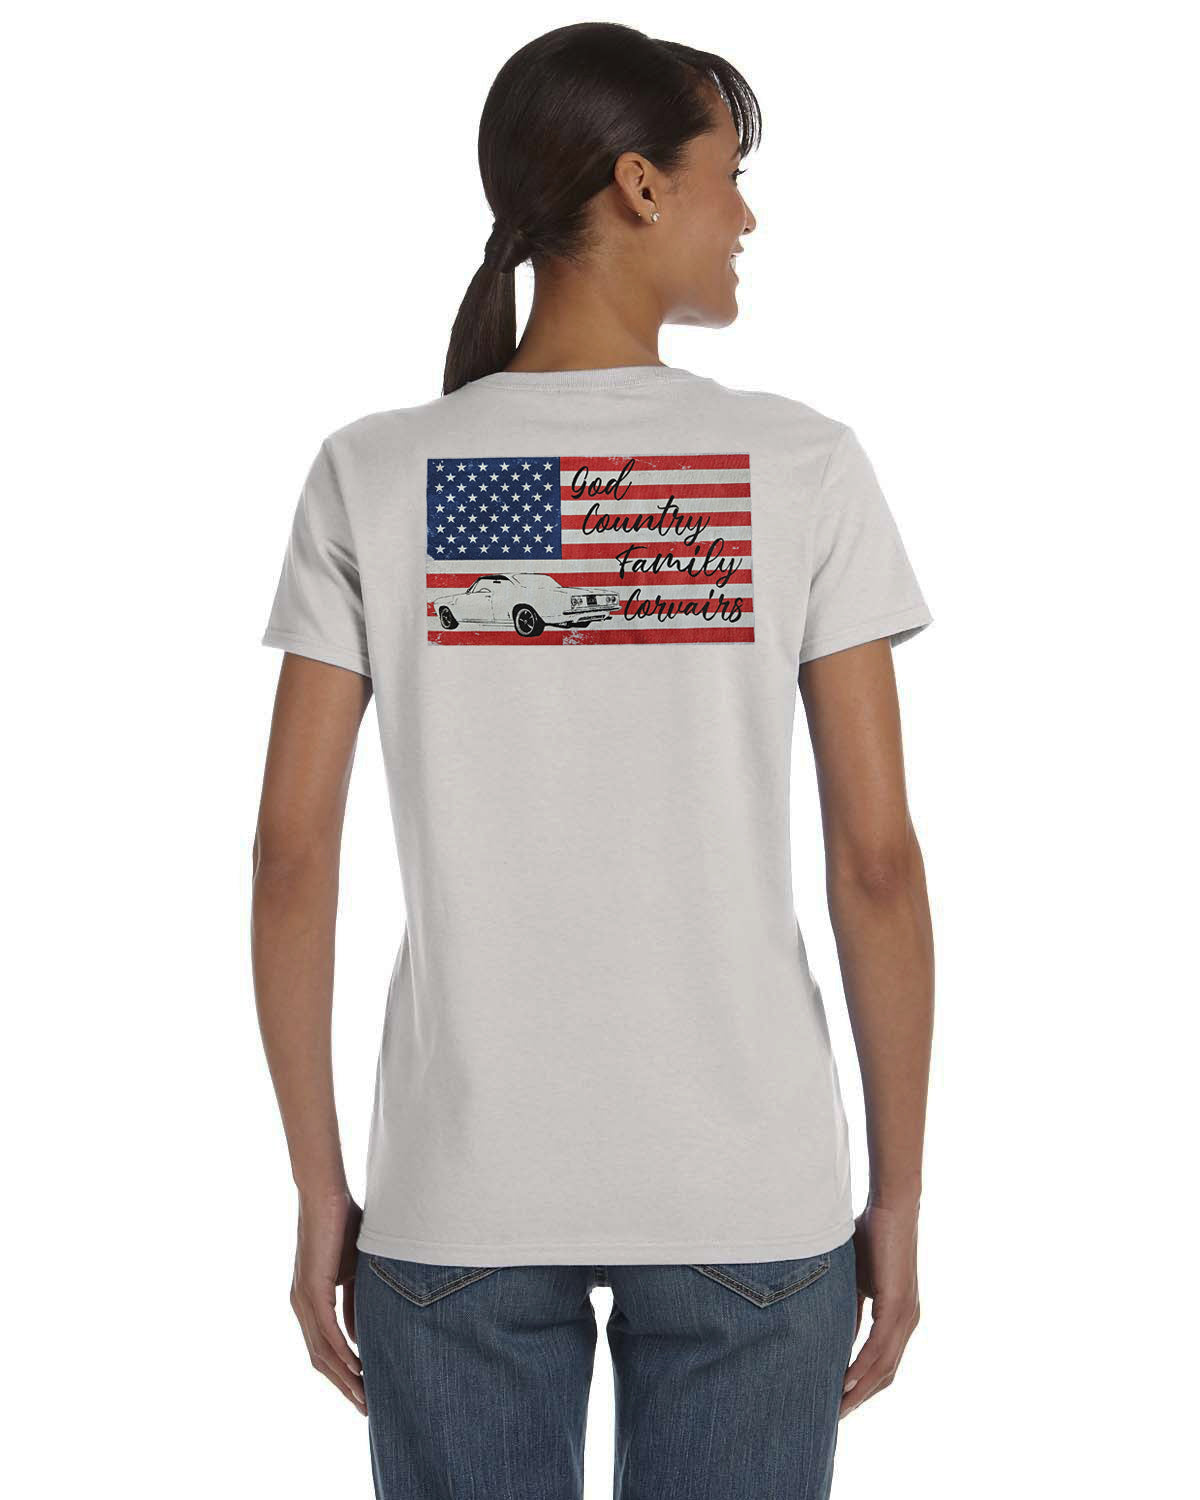 Short sleeve "God, Country, Family, Corvairs" t-shirt